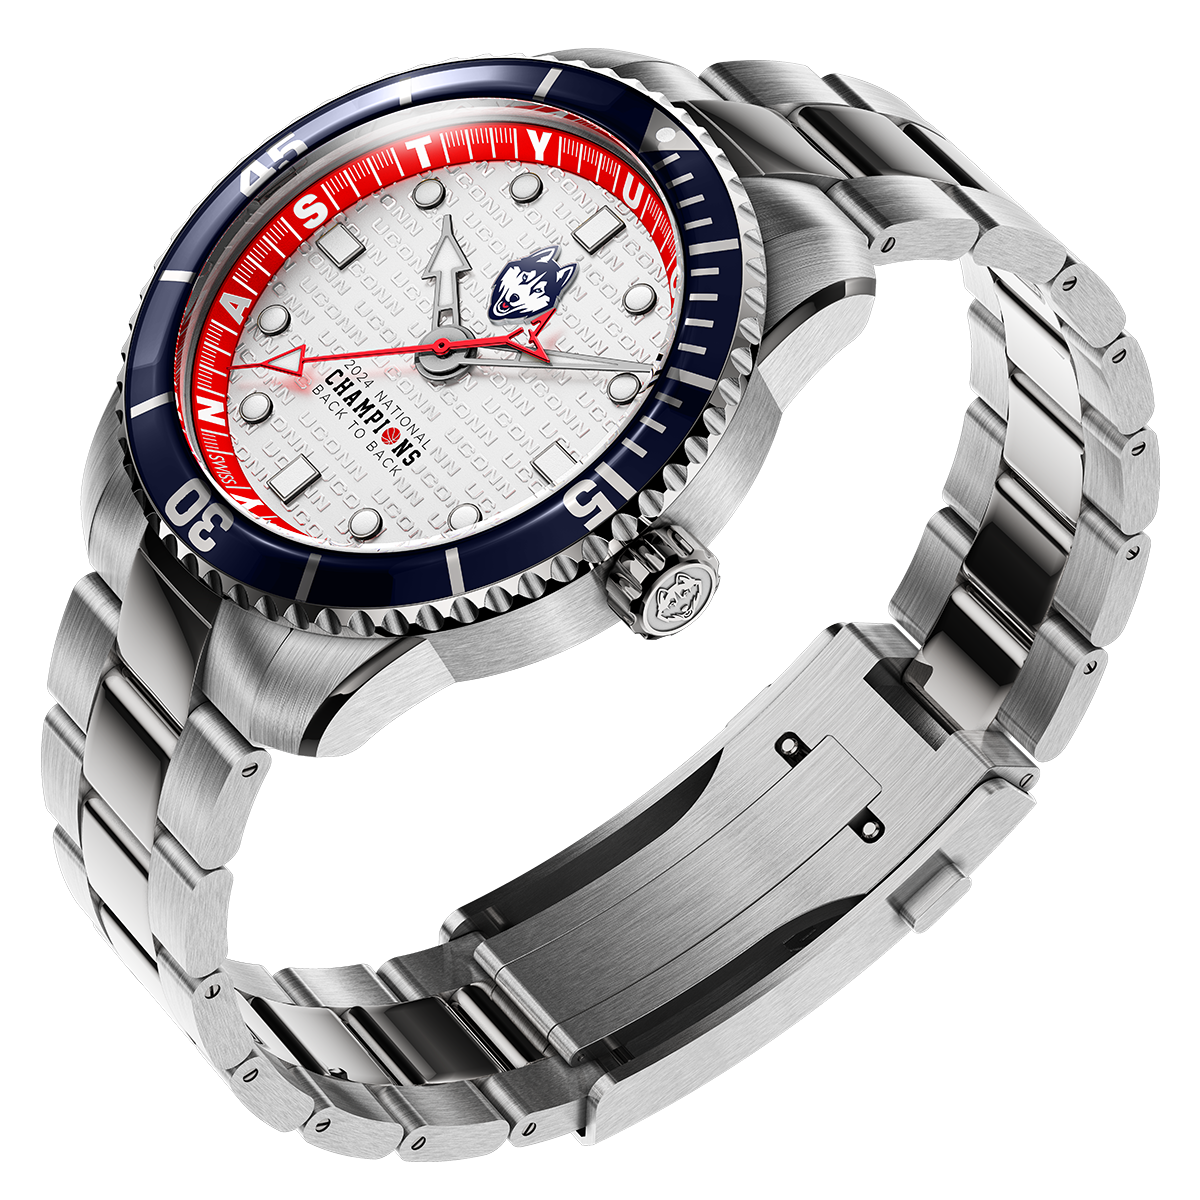 UCONN 2024 National Champions Swiss made automatic watch. Back to back champions. Three Quarter view.